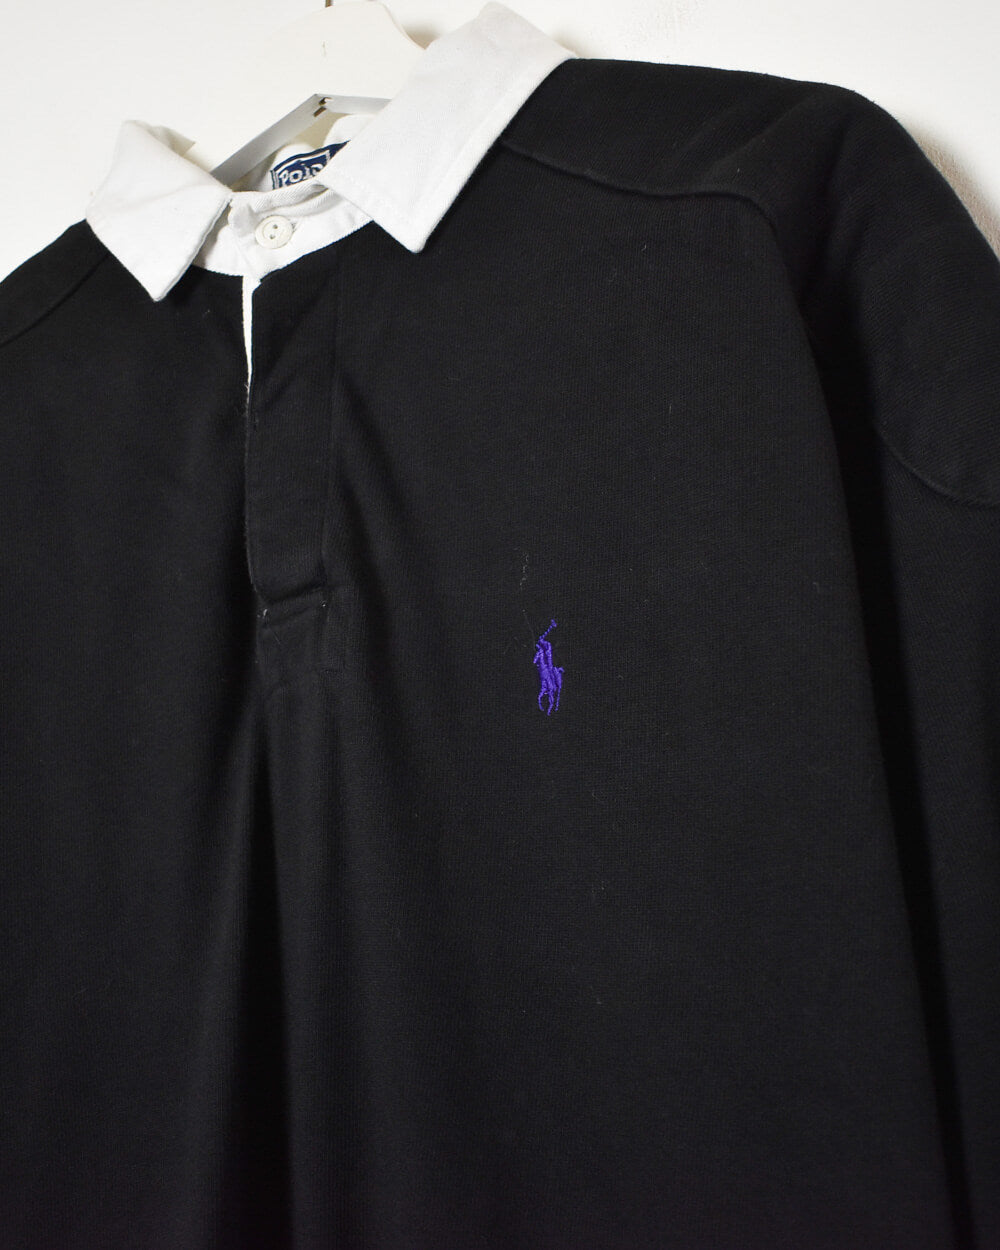 Black Polo Ralph Lauren Rugby Shirt - X-Large